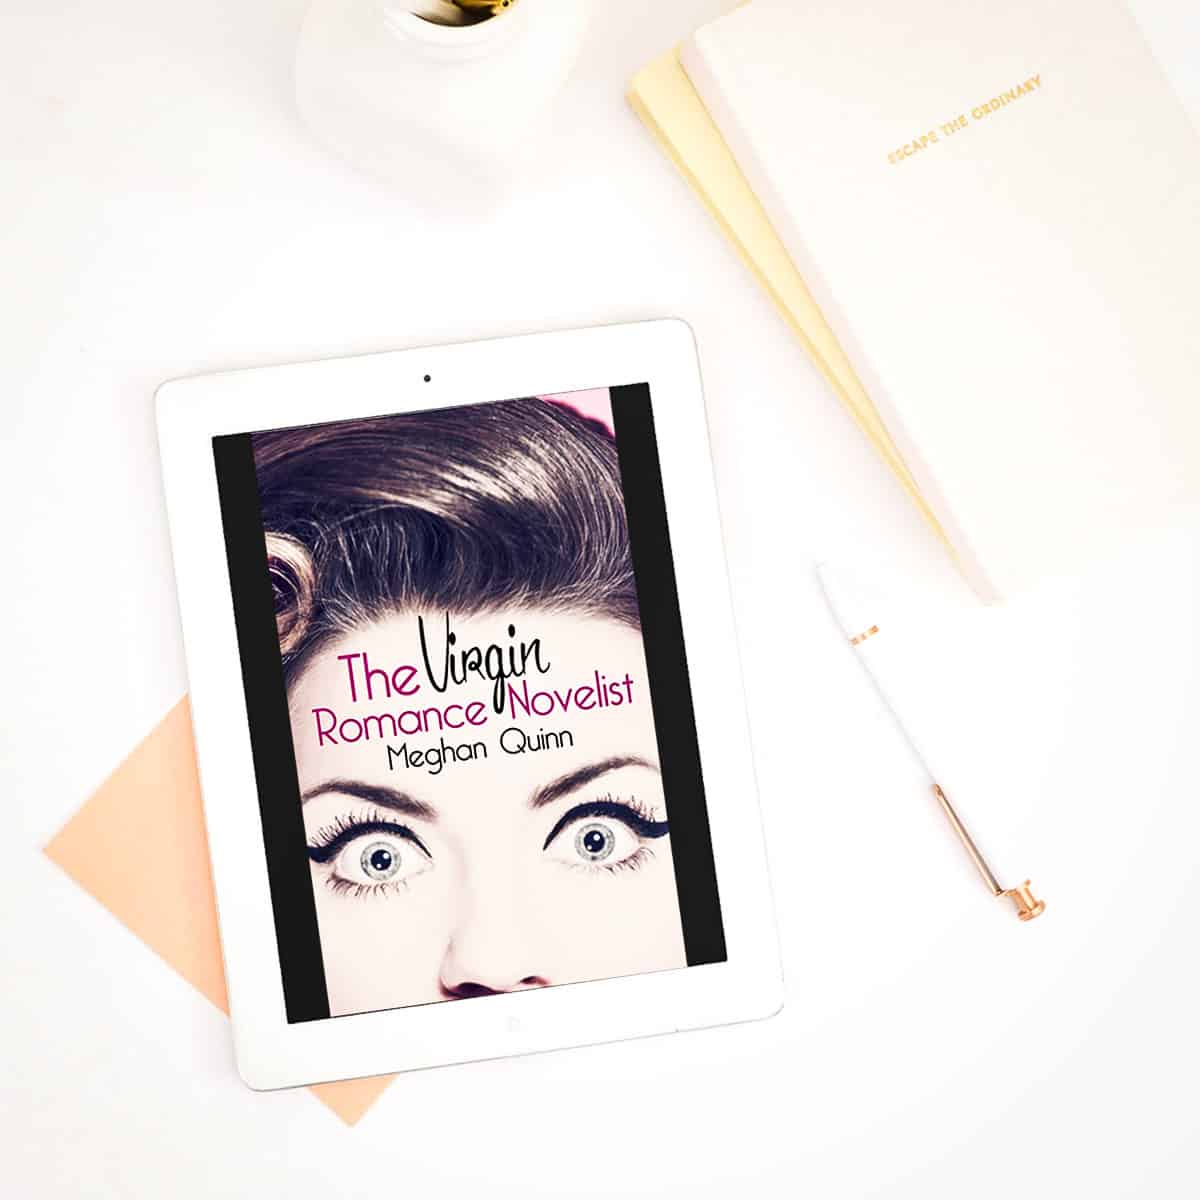 If you enjoy laughing until it hurts and reading about a twentysomething’s escapades to finding love, The Virgin Romance Novelist by Meghan Quinn is for you!